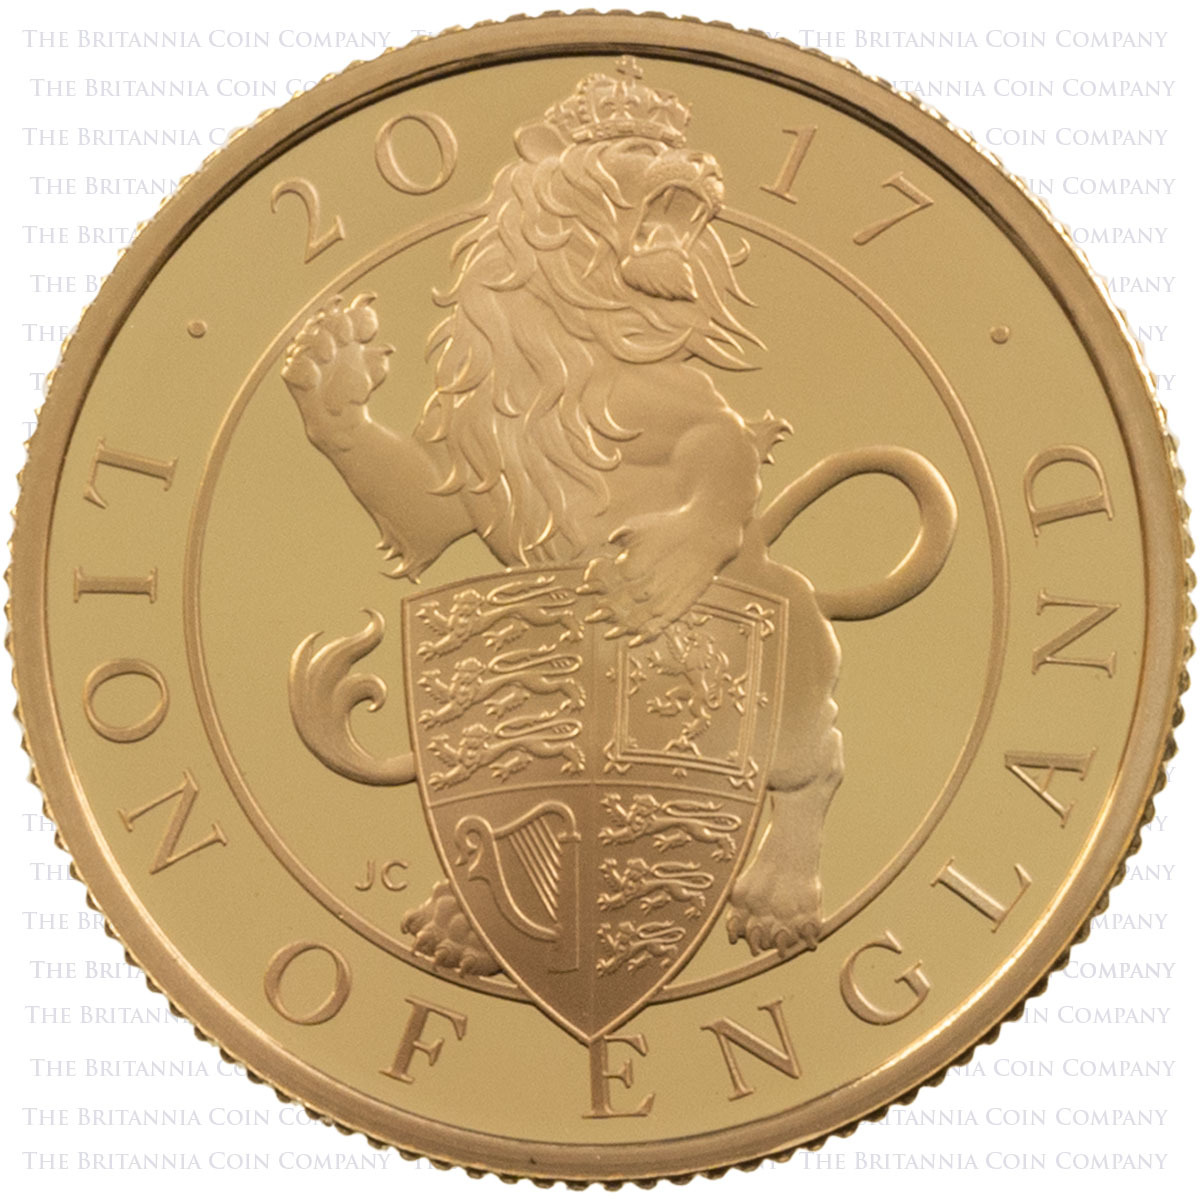 UK17QBQO 2017 Queen's Beasts Lion Of England Quarter Ounce Gold Proof Coin Reverse